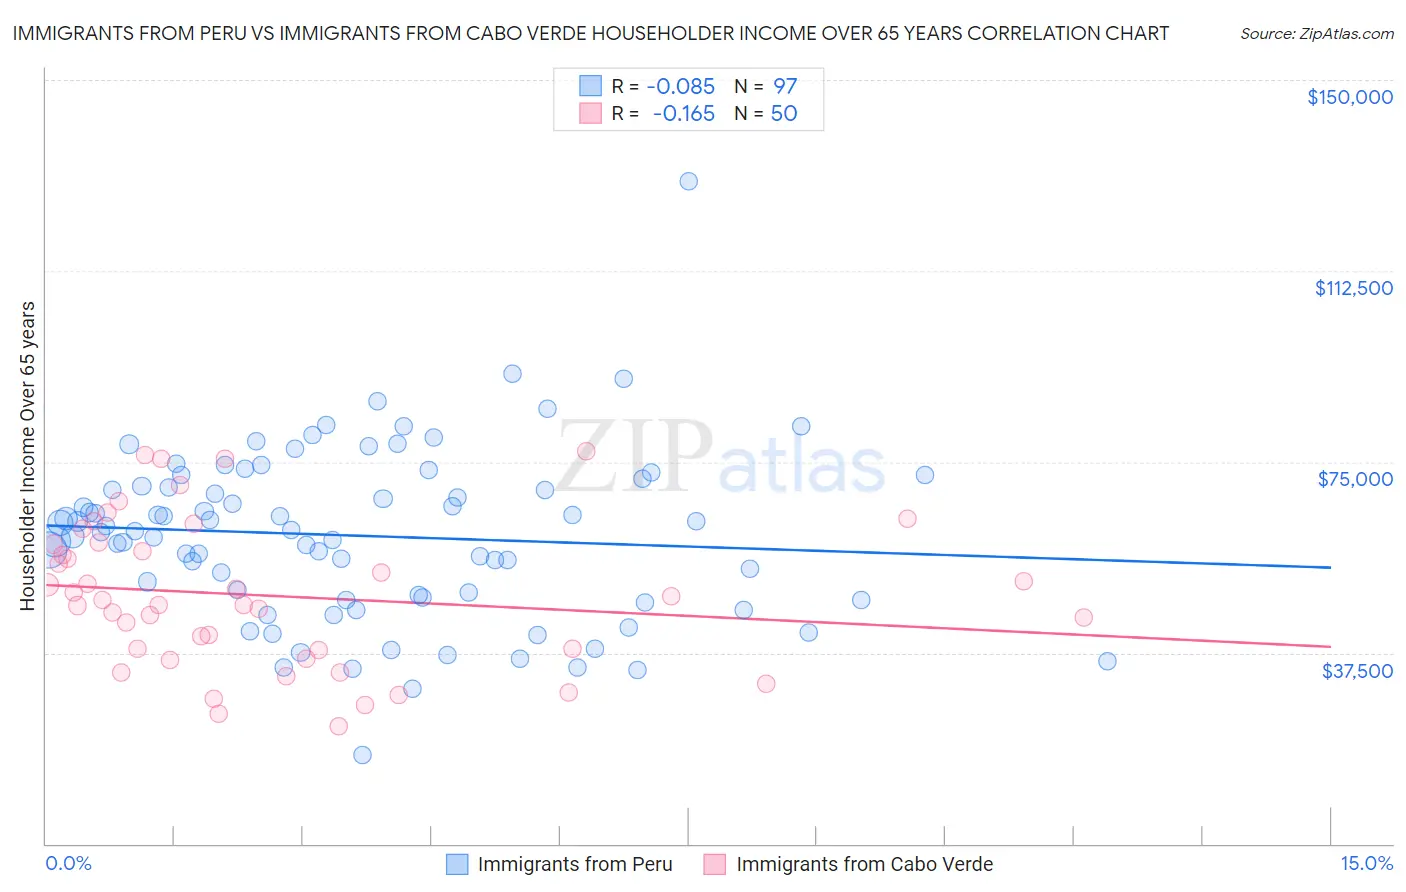 Immigrants from Peru vs Immigrants from Cabo Verde Householder Income Over 65 years